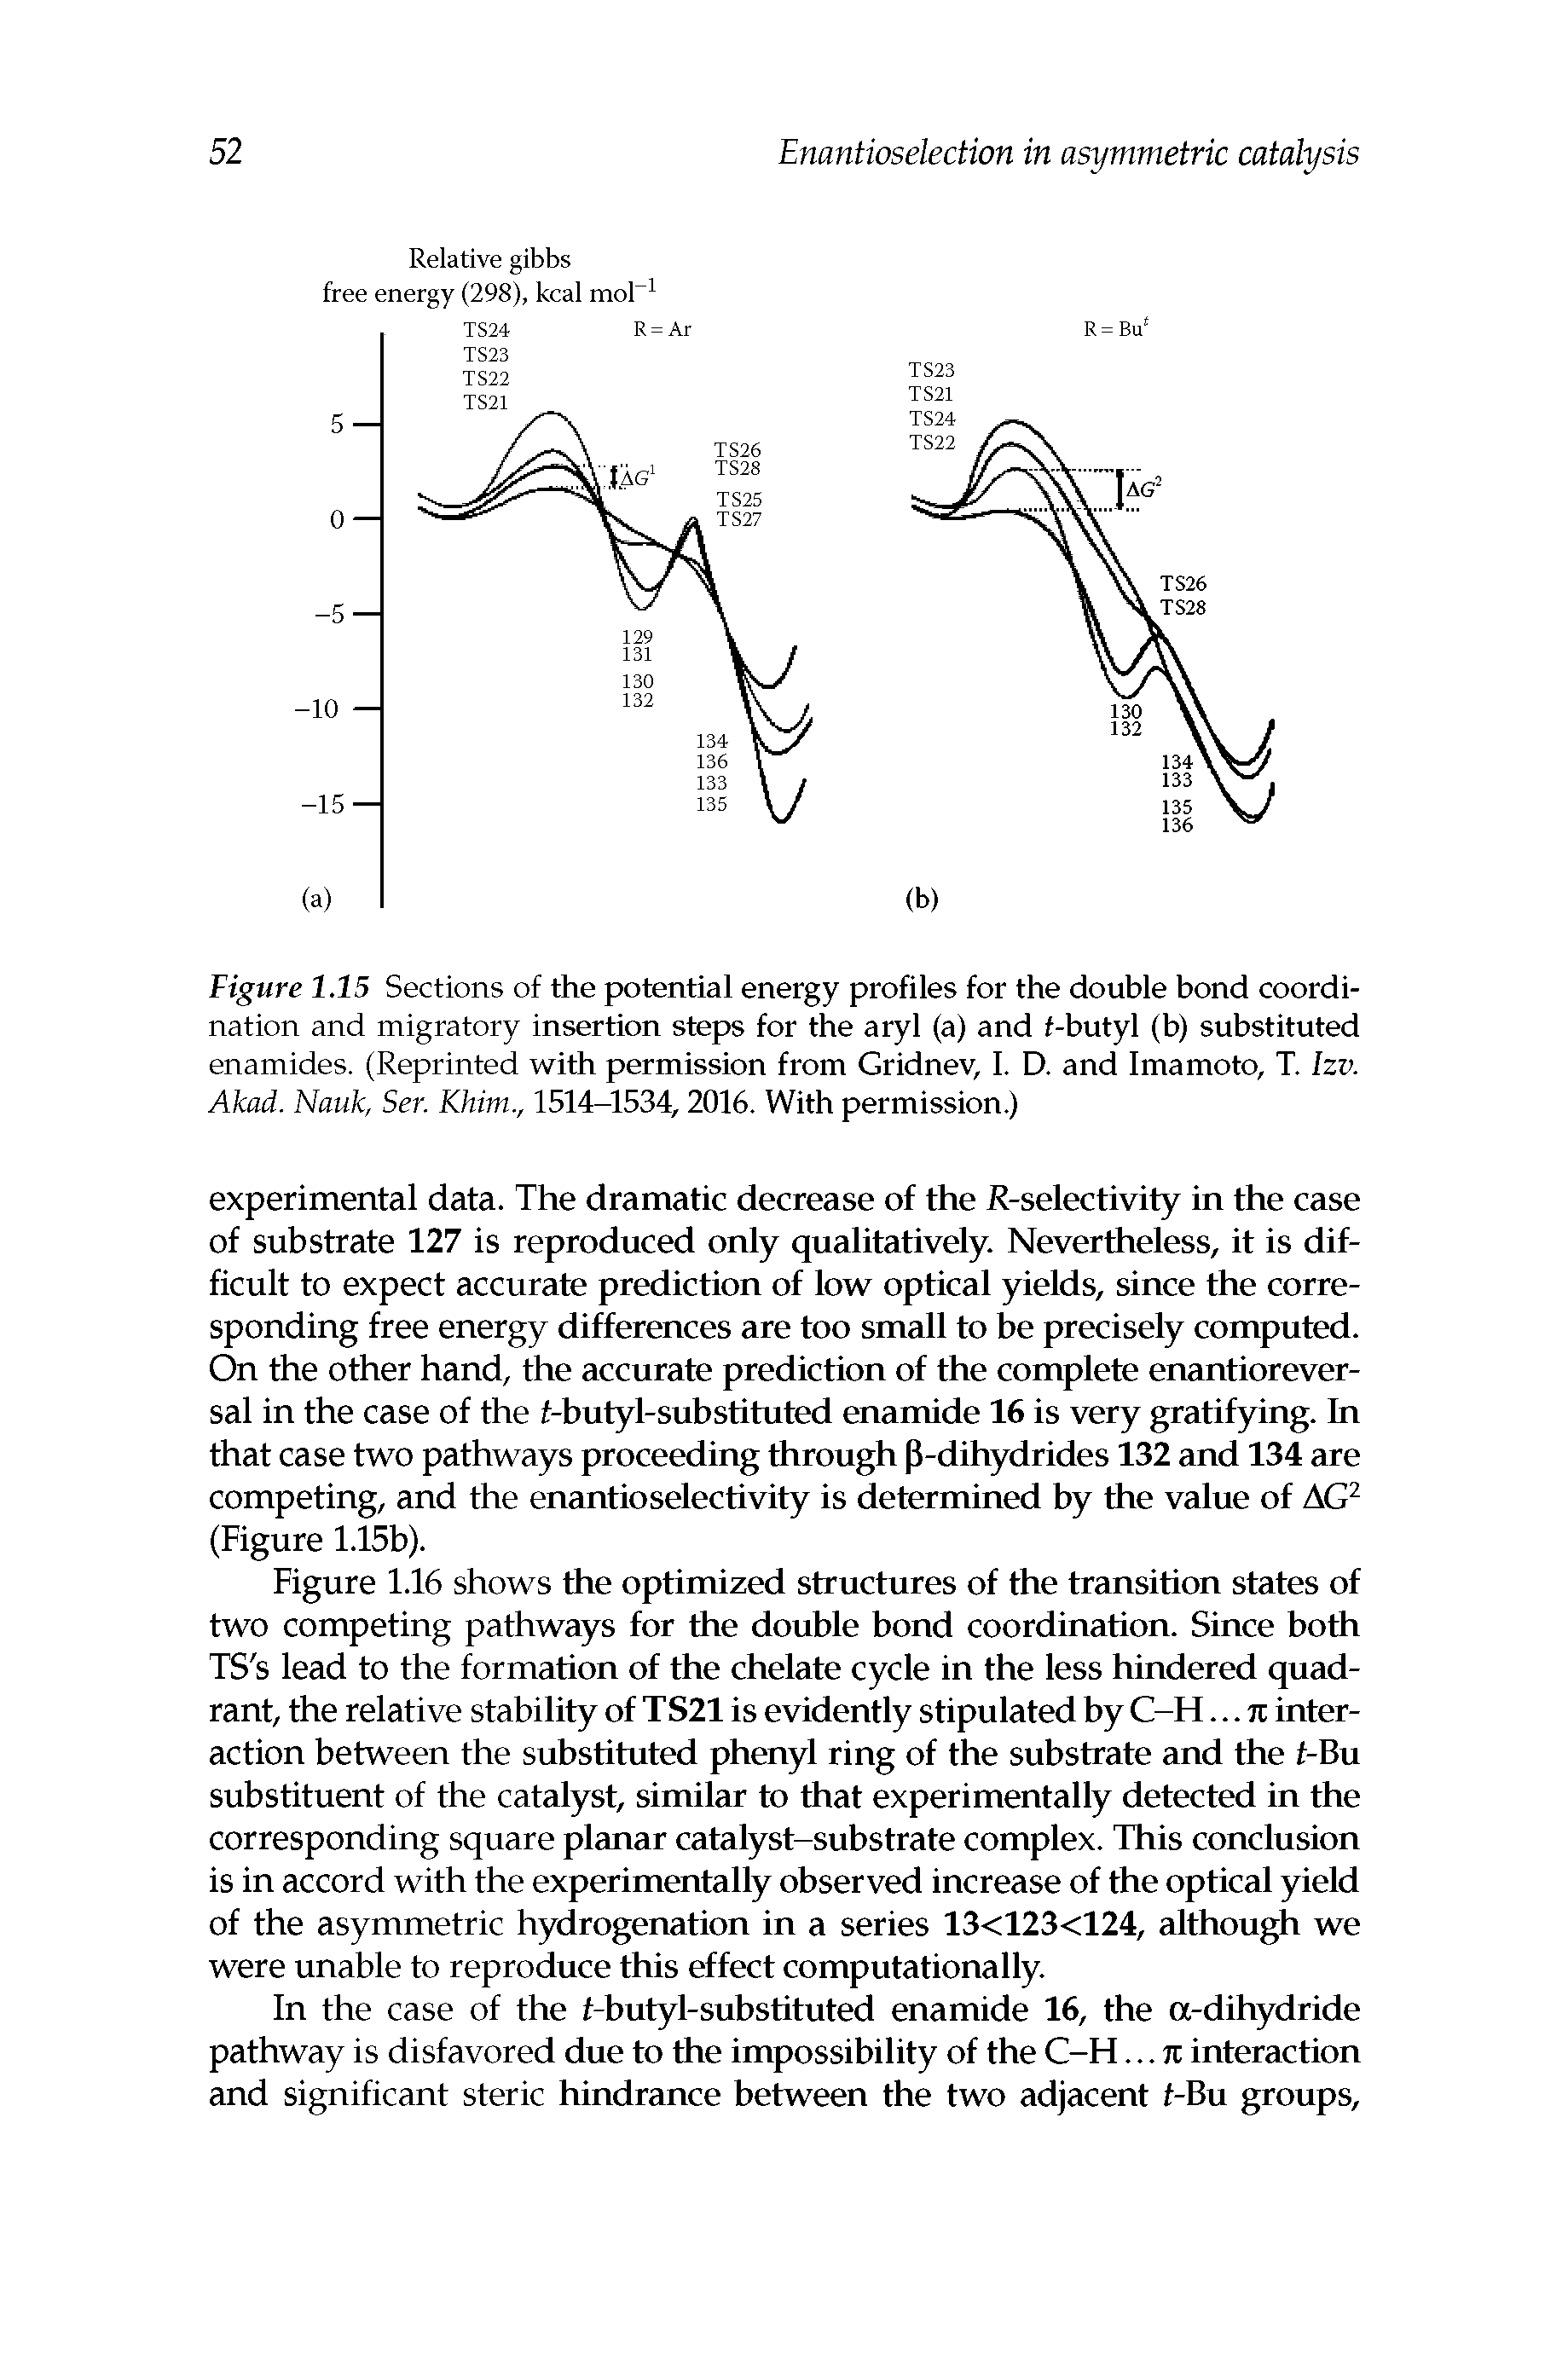 Figure 1.15 Sections of the potential energy profiles for the double bond coordination and migratory insertion steps for the aryl (a) and f-butyl (b) substituted enamides. (Reprinted with permission from Gridnev, I. D. and Imamoto, T. Izv. Akad. Nauk, Ser. Khim., 1514-1534,2016. With permission.)...